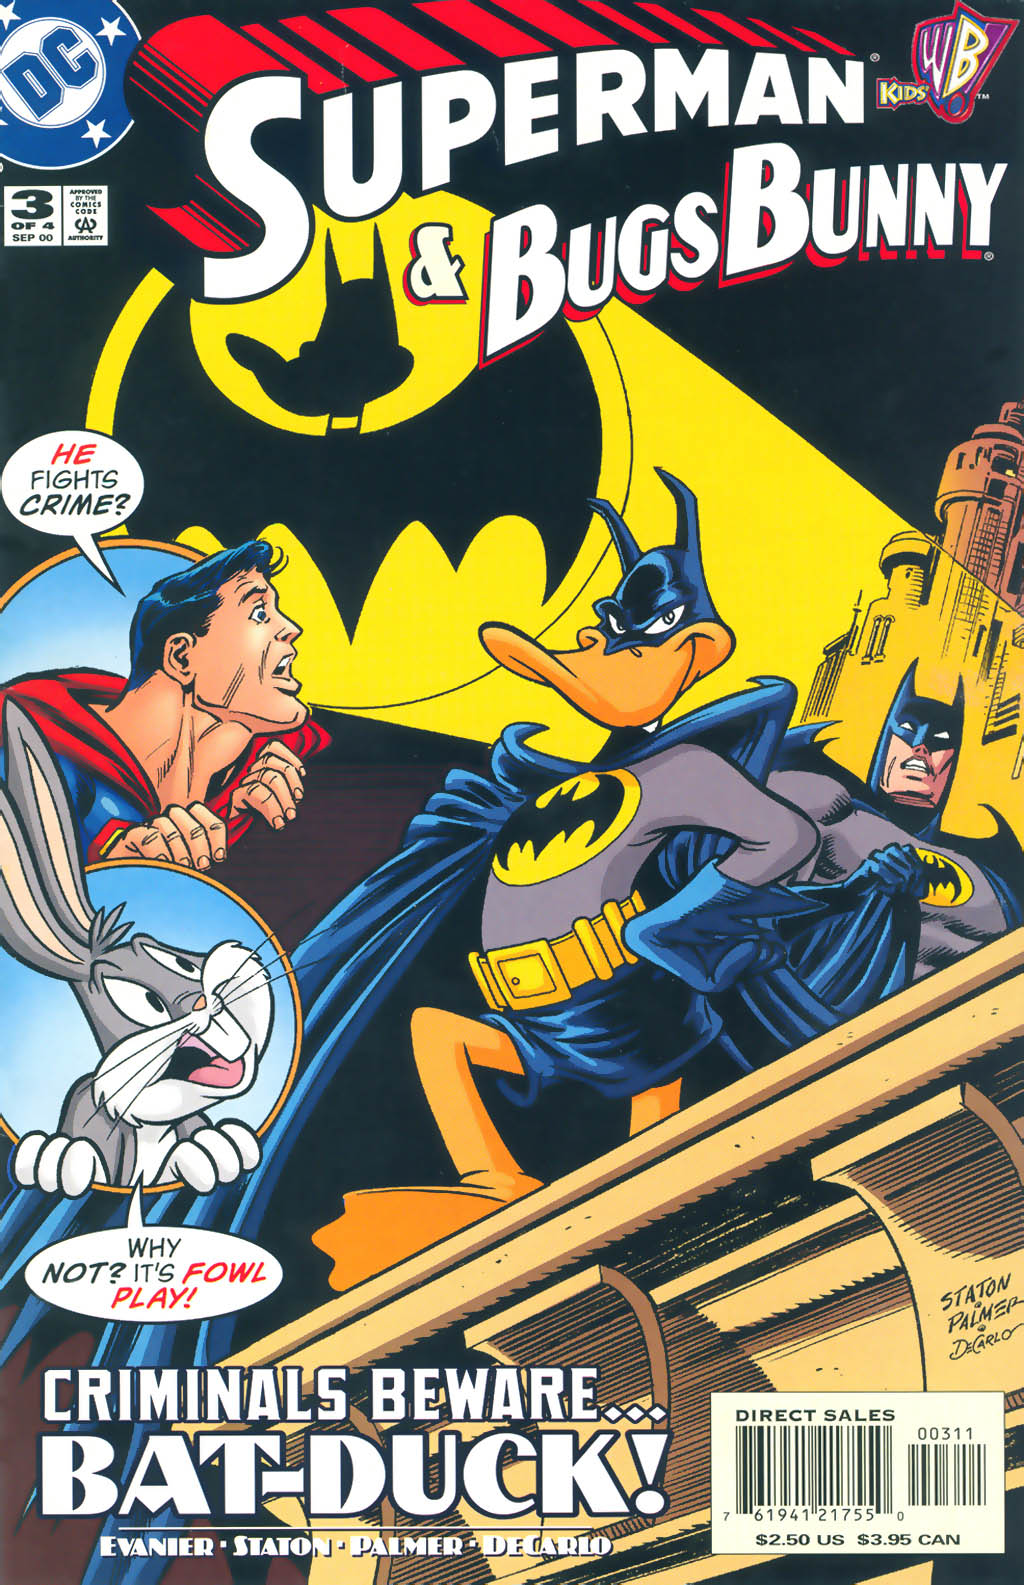 Read online Superman & Bugs Bunny comic -  Issue #3 - 1